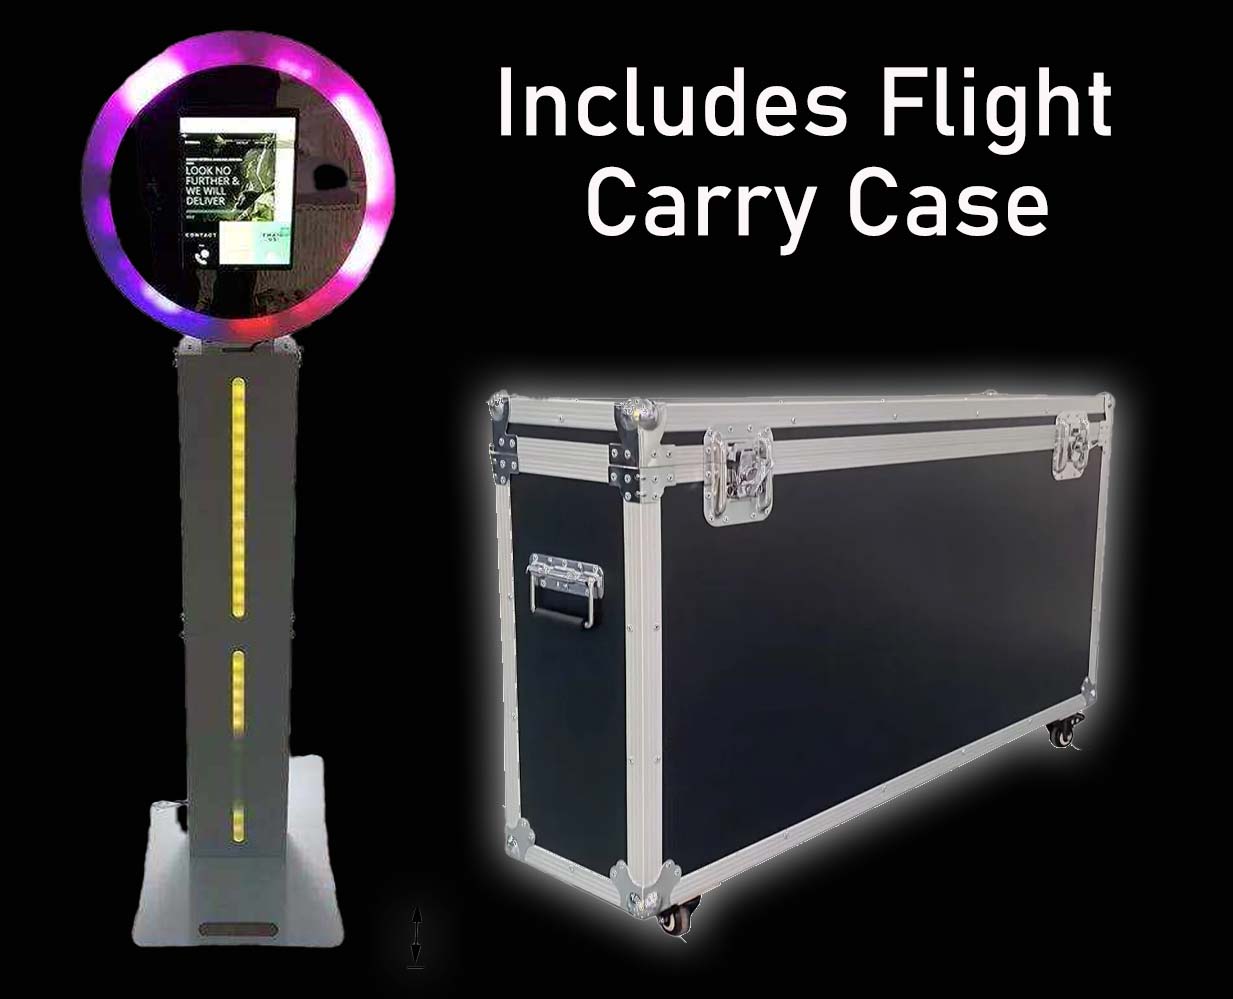 iPad Photo Booth With Carry Case